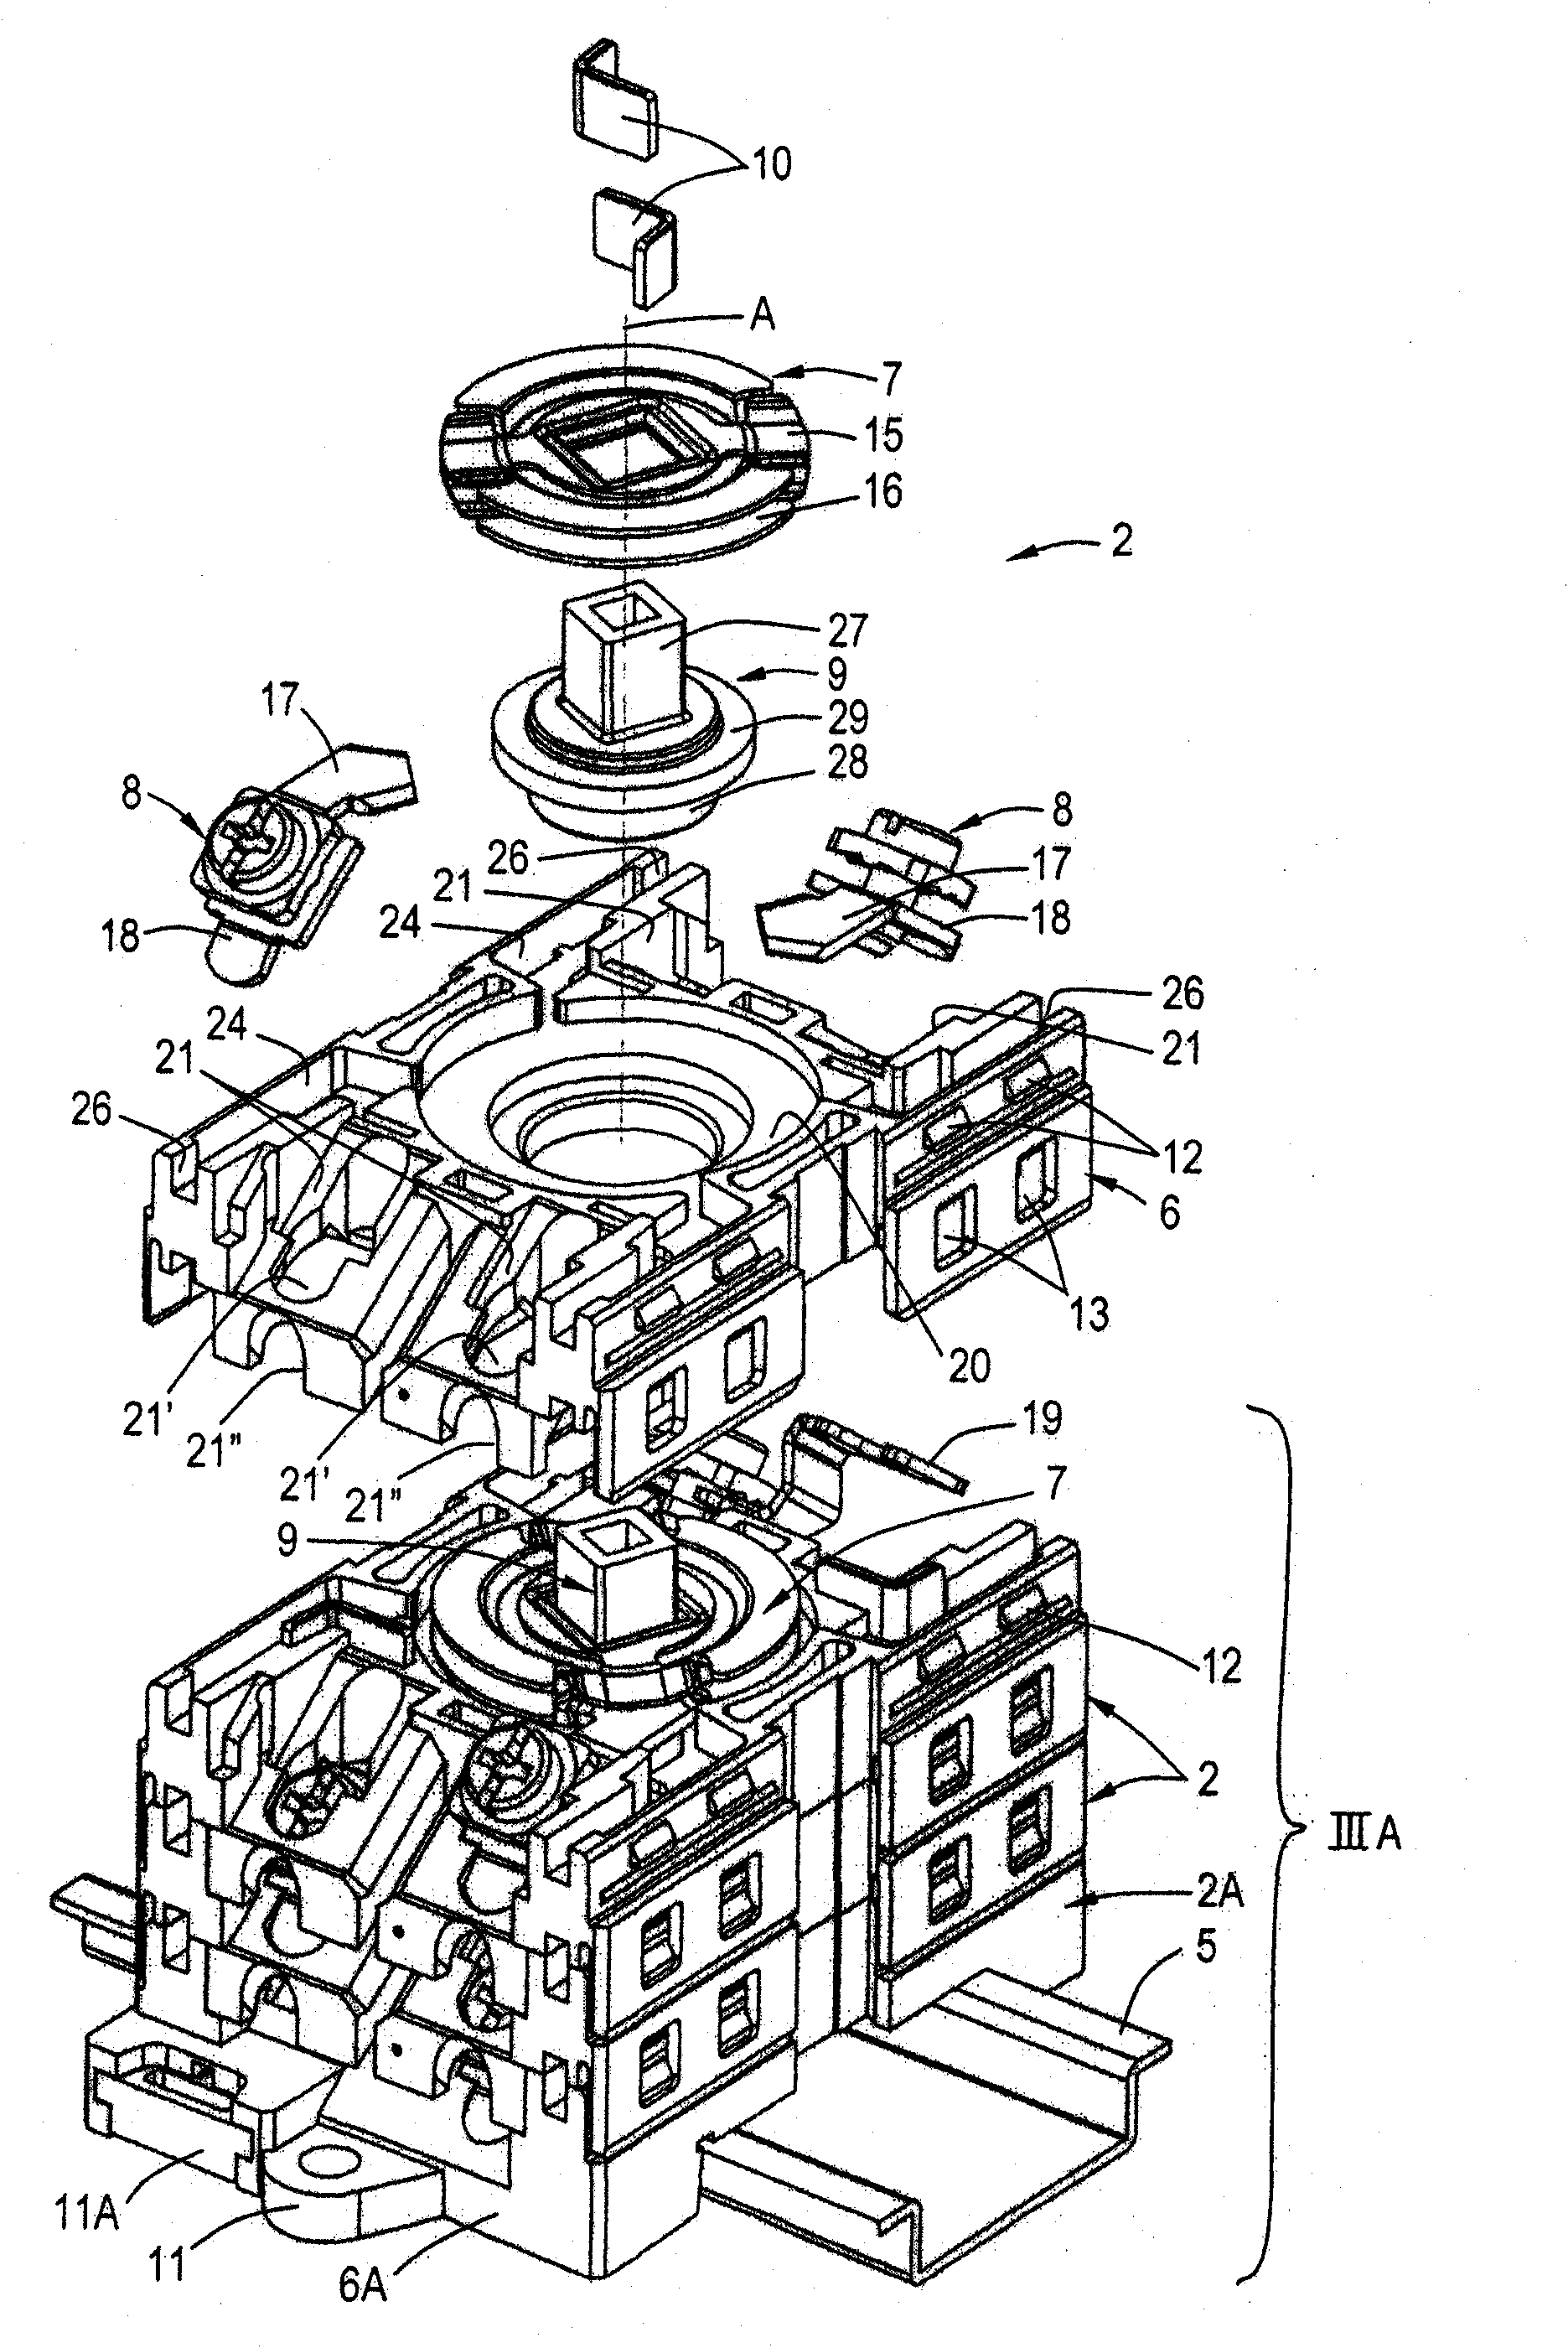 Electrical rotary switch